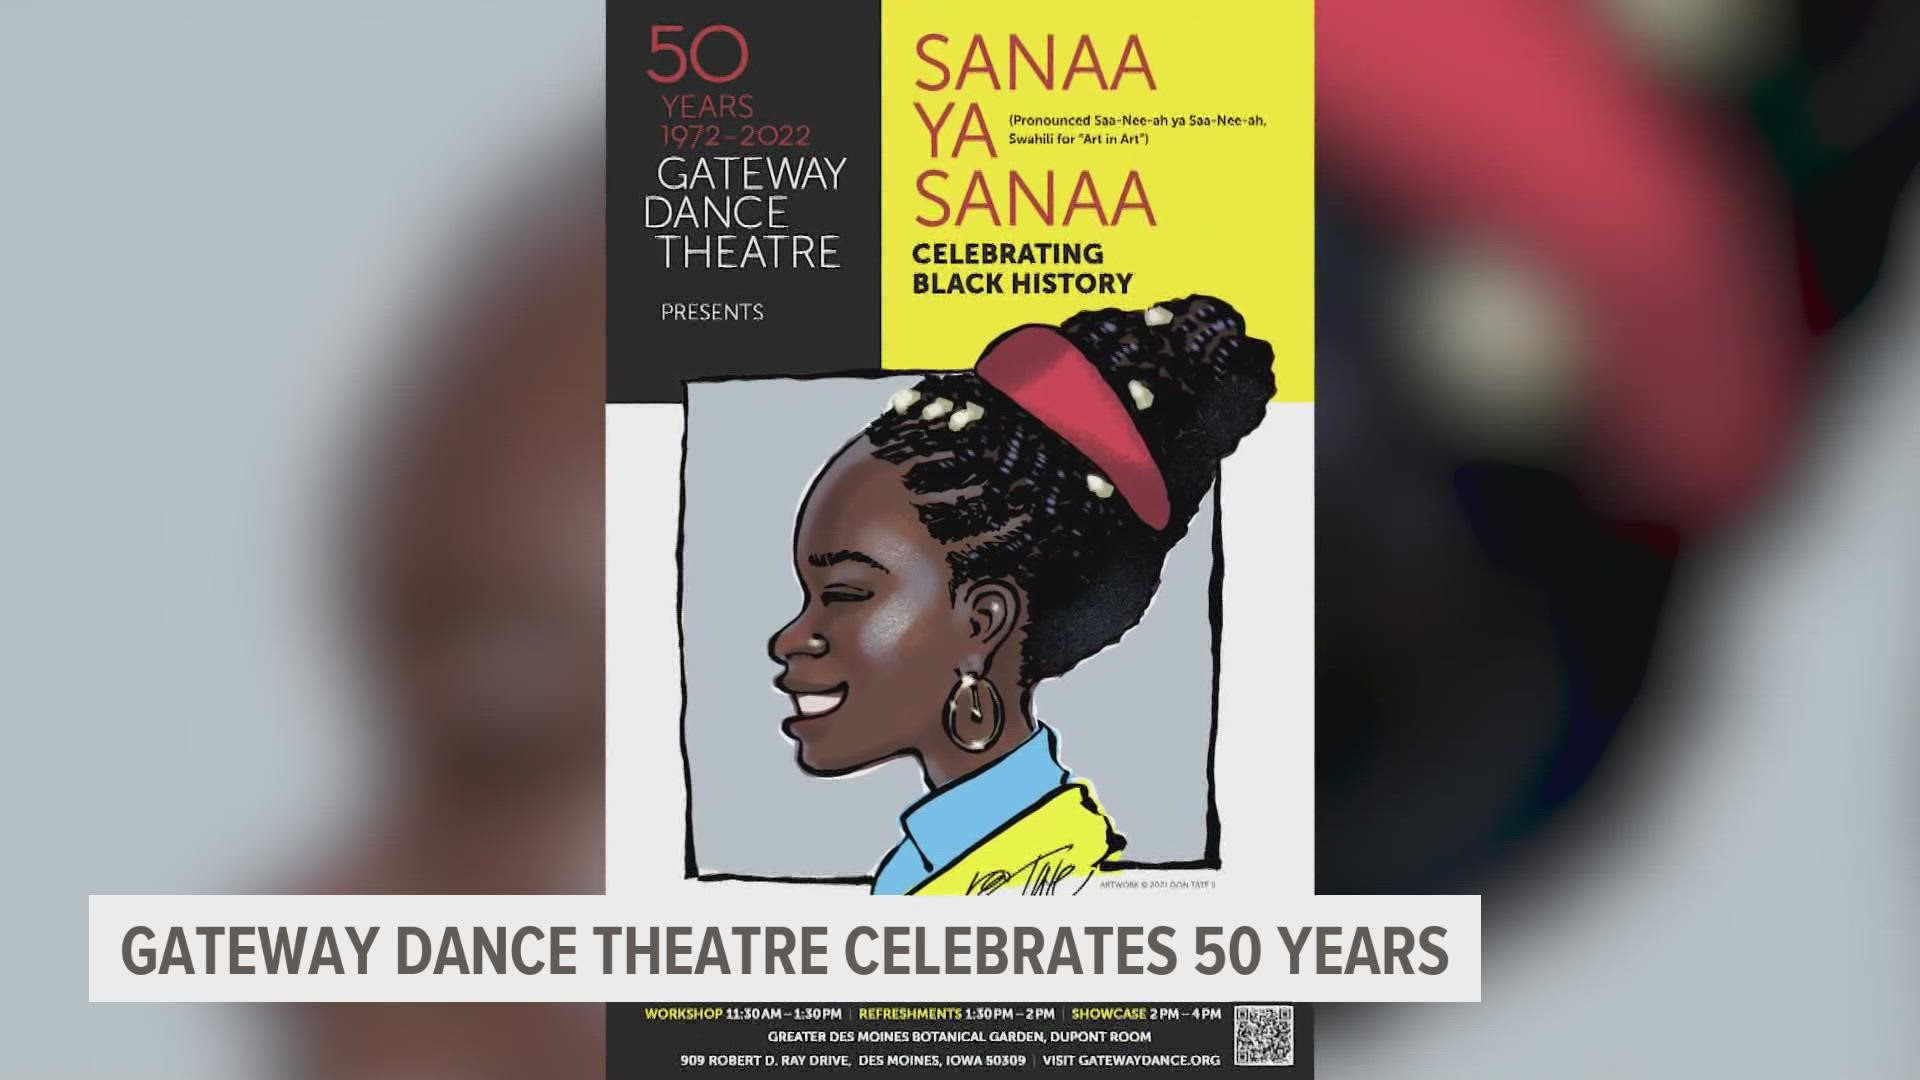 Gateway Dance Theatre, a place that let minorities for the last 50 years display their talent when others wouldn't, is celebrating its anniversary with an art show.